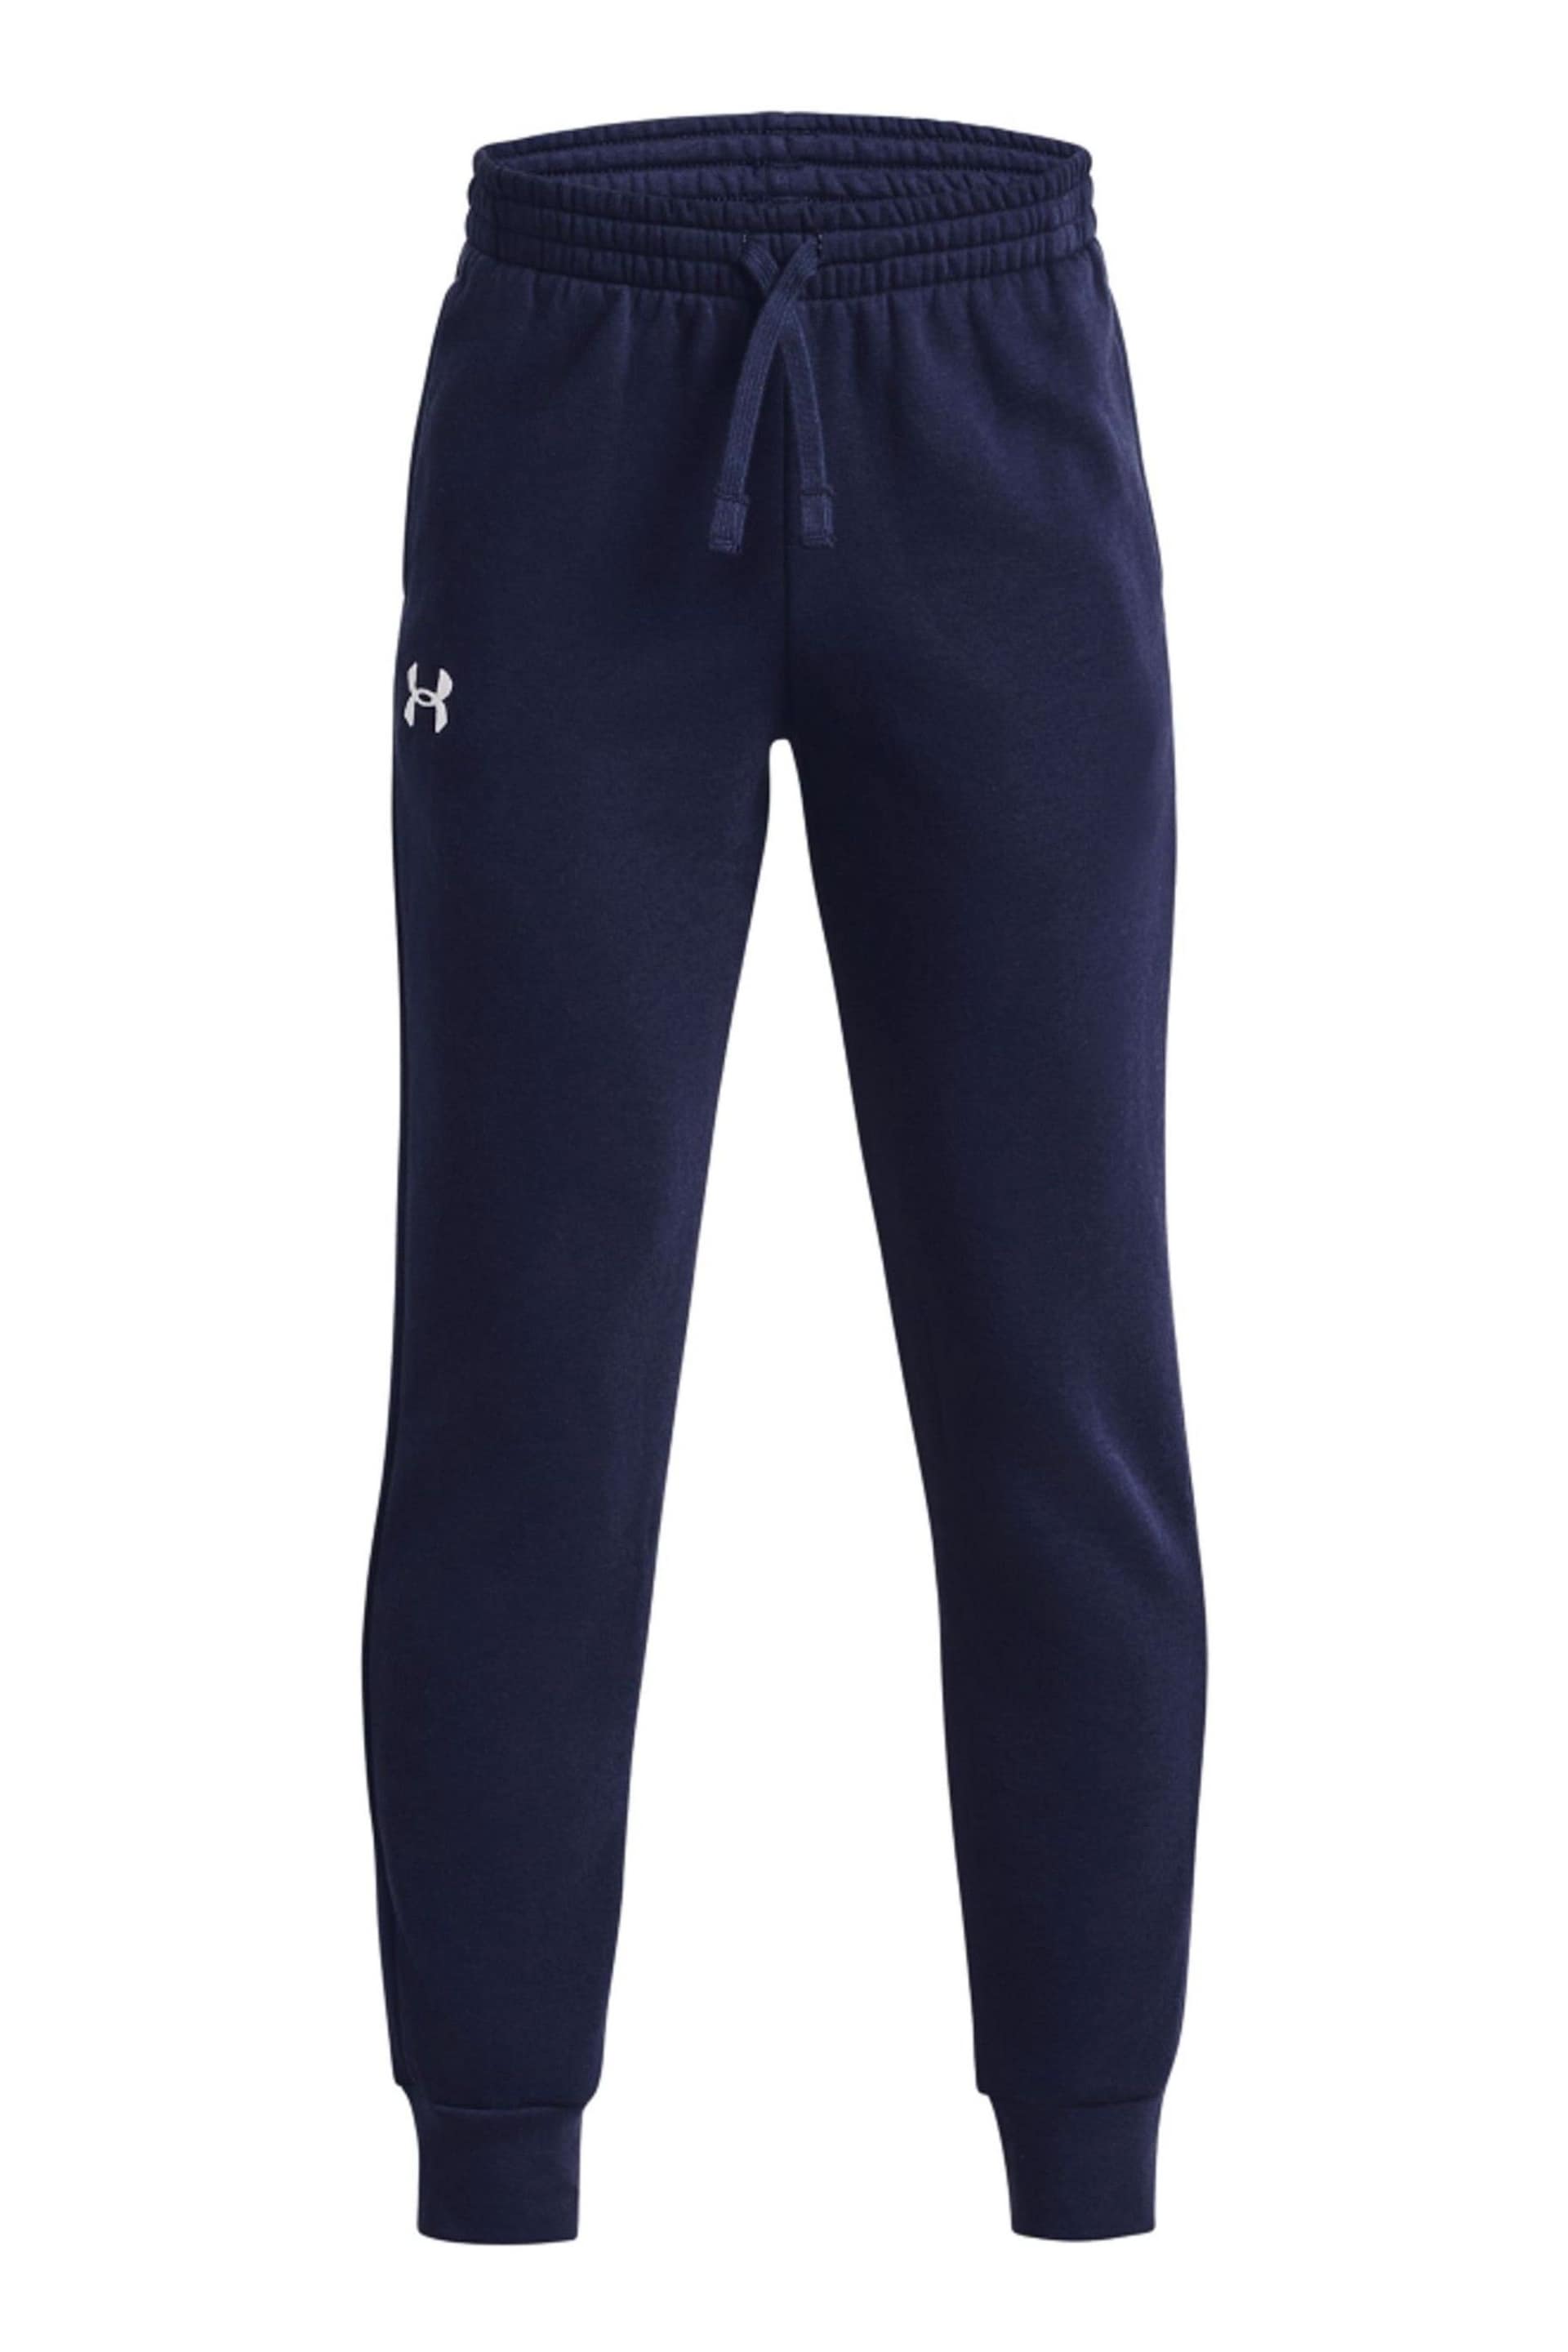 Under Armour Blue Rival Fleece Joggers - Image 5 of 6